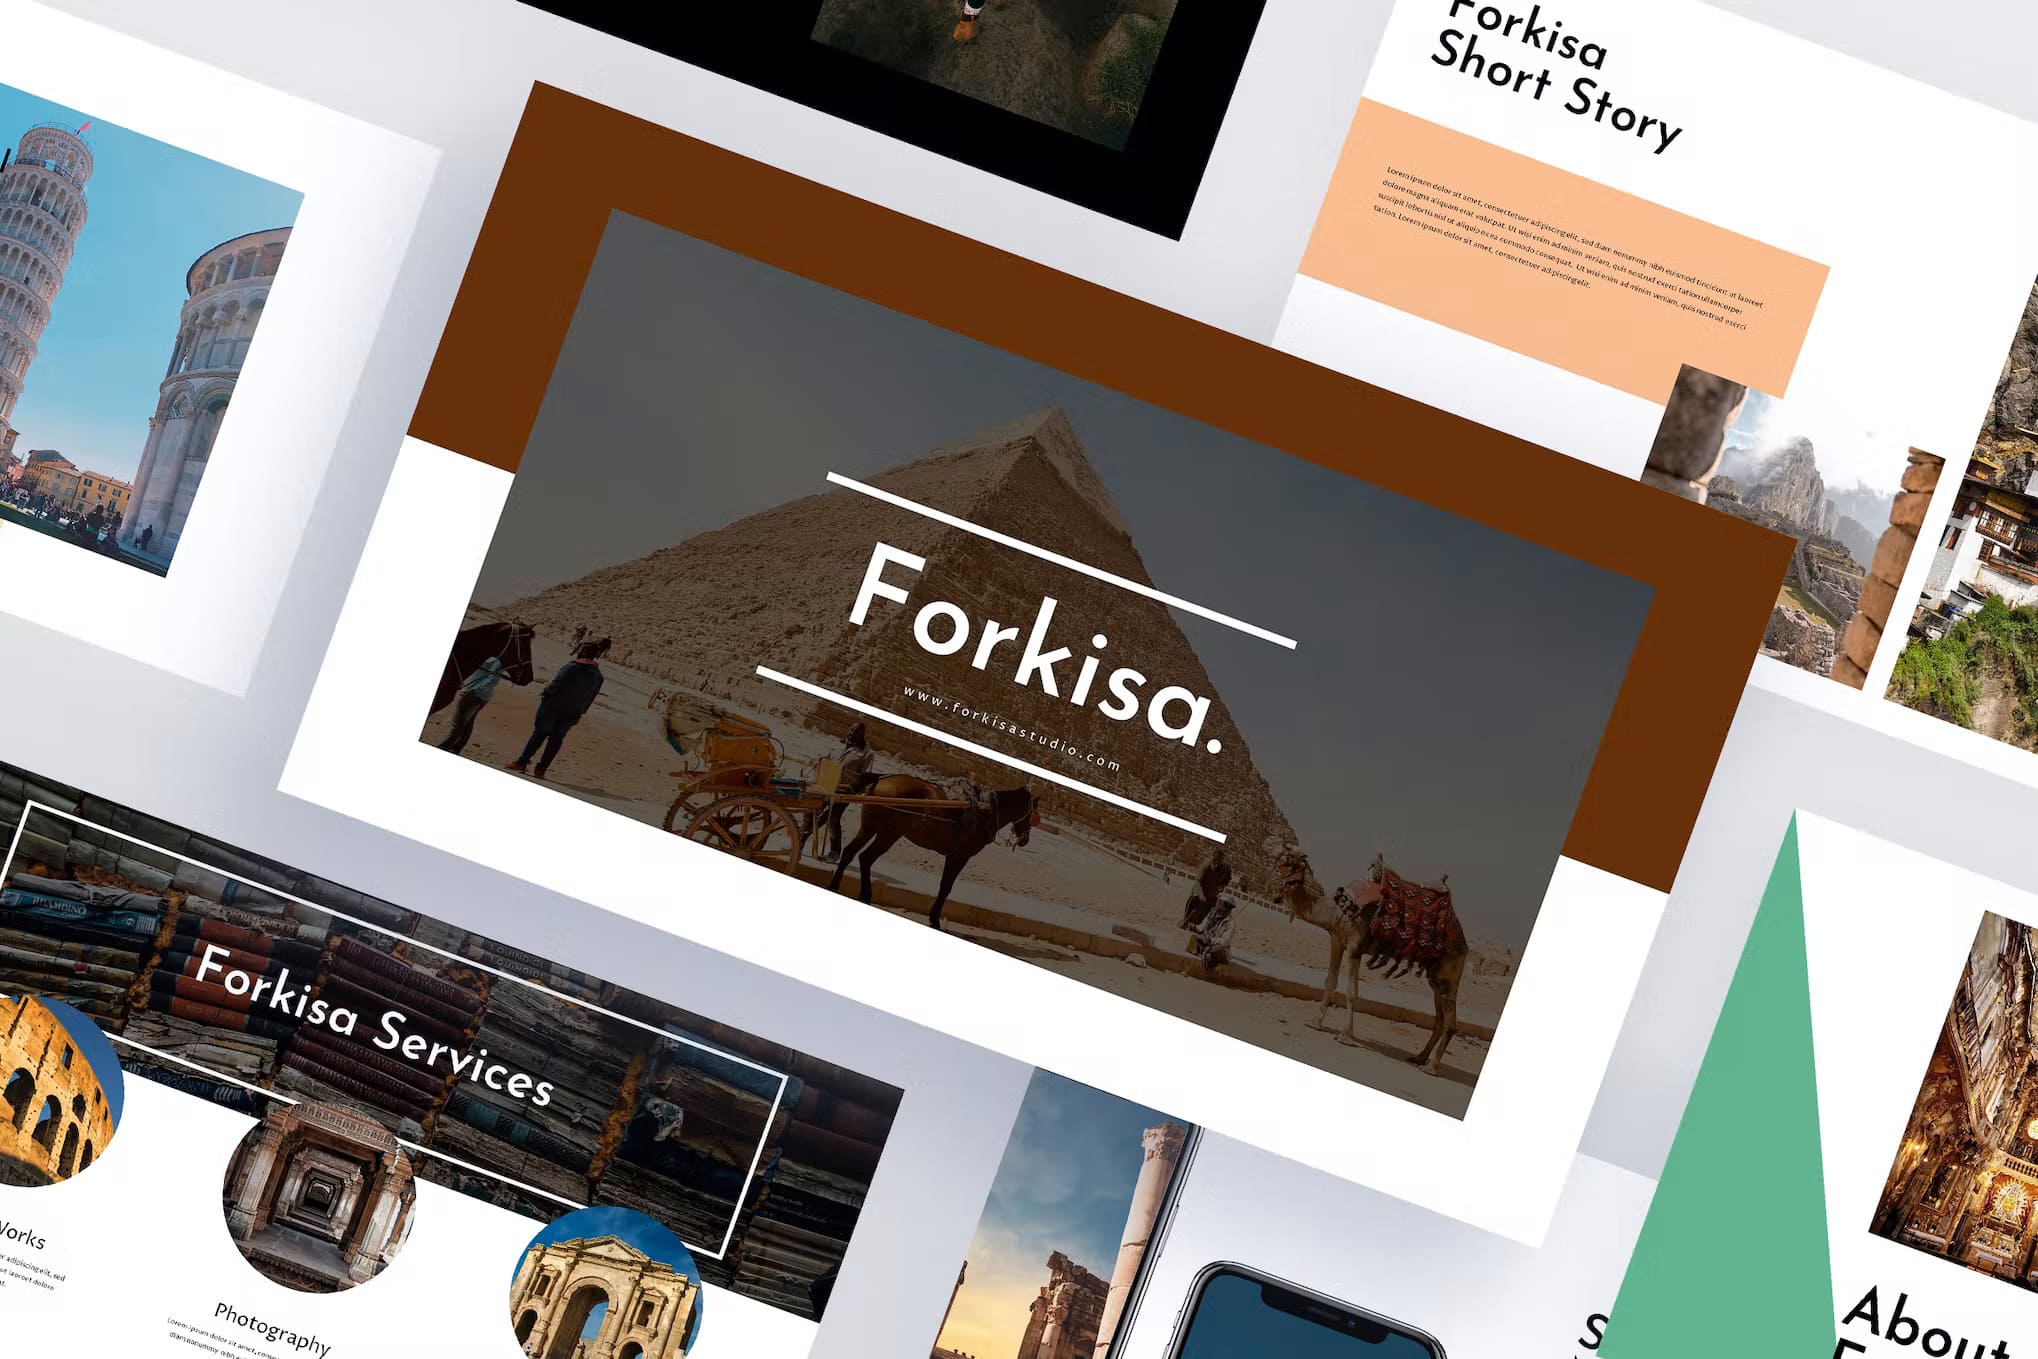 forkisa history powerpoint template presentation.